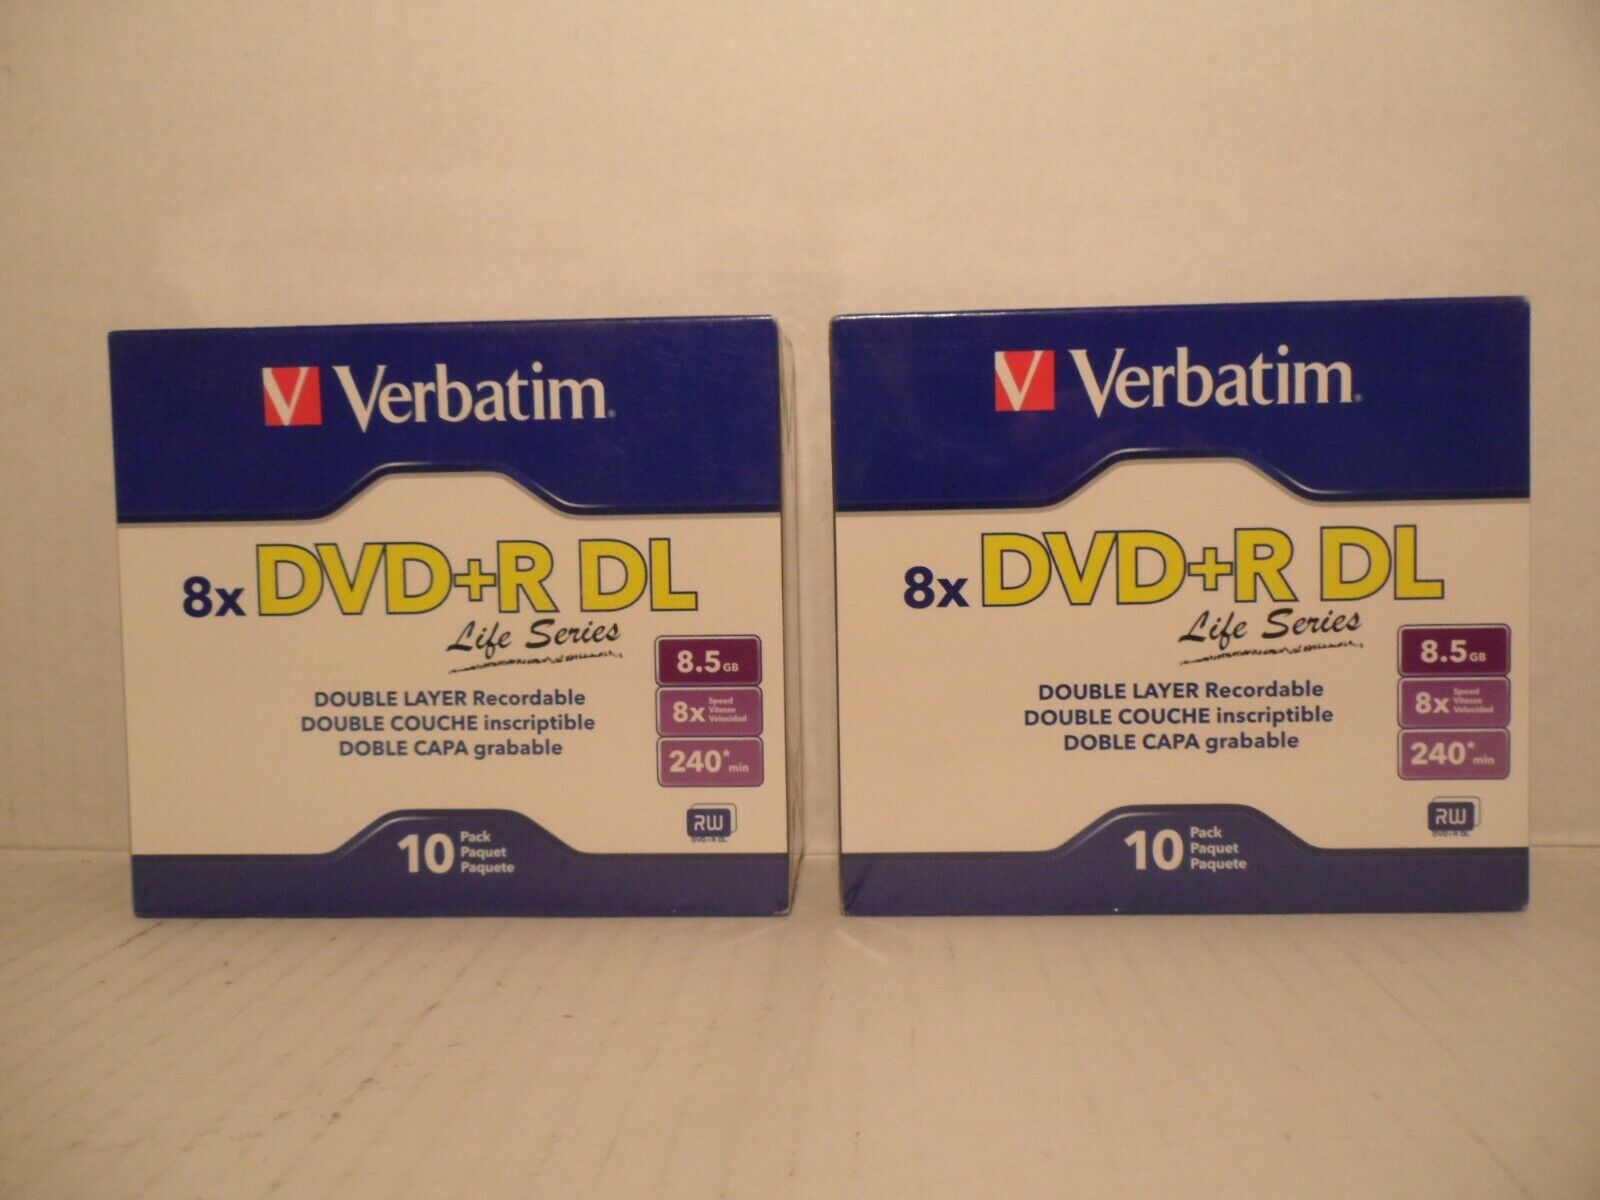 (2 pack) Verbatim DVD + R DL 10 pack double layer recordable, new unopened box